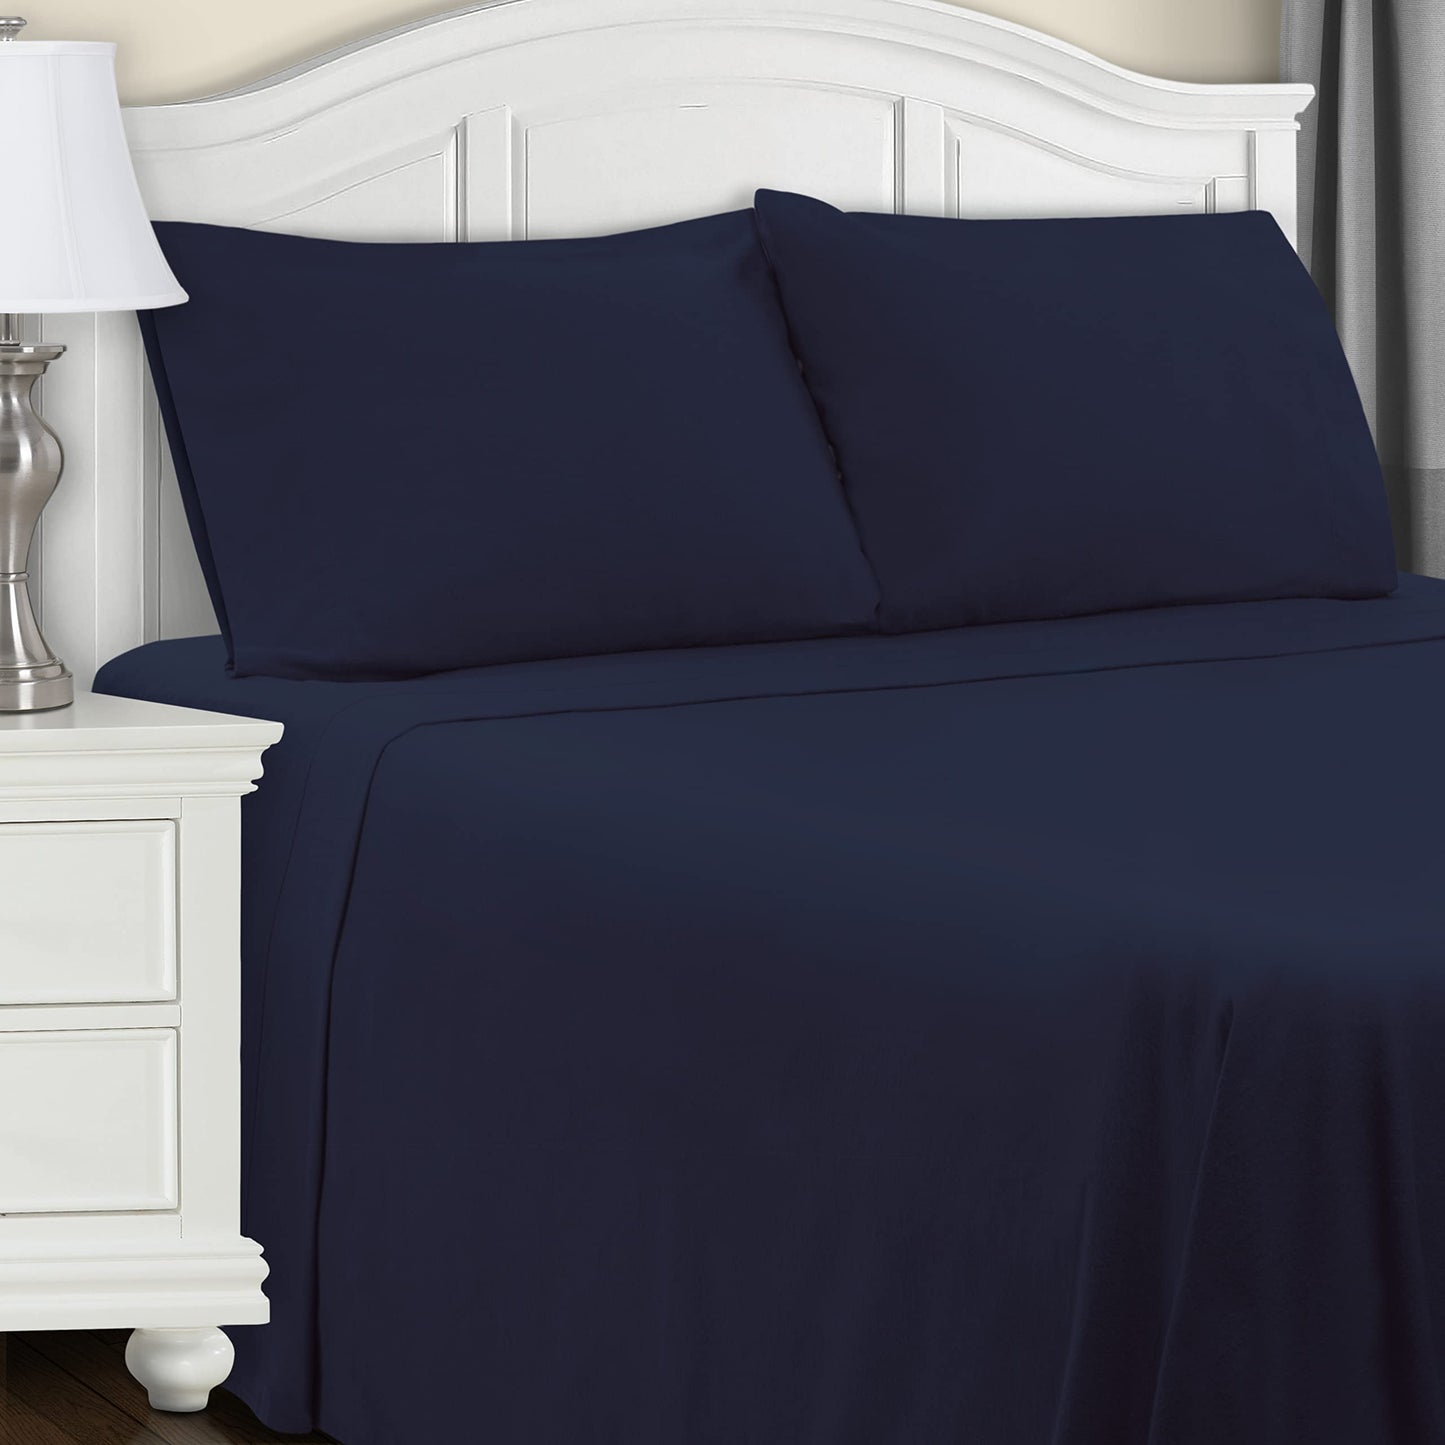 Superior Extra Soft All Season 100% Brushed Cotton Flannel Solid Bedding Sheet Set with Deep Pockets Fitted Sheet - Navy Blue, Twin XL Size